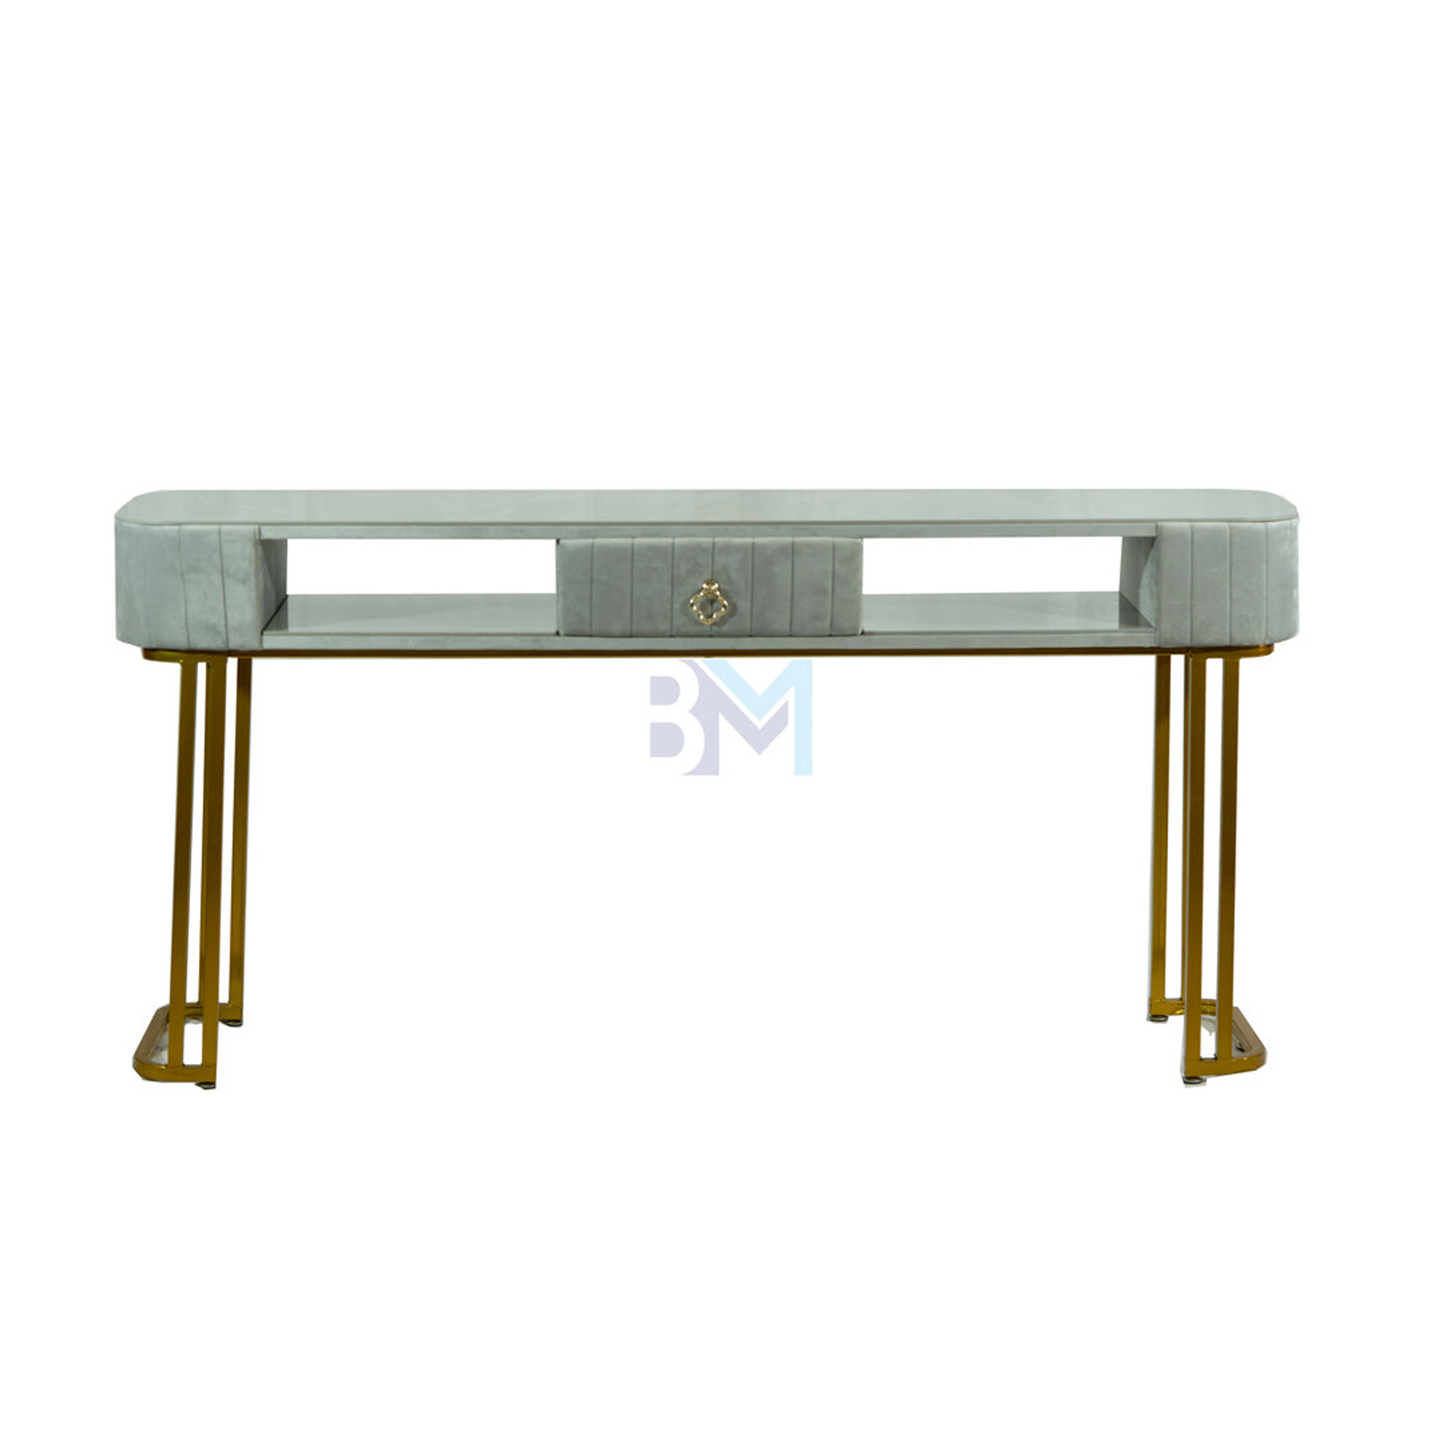 Double manicure table in gray velvet with marble-like ceramic and gold base